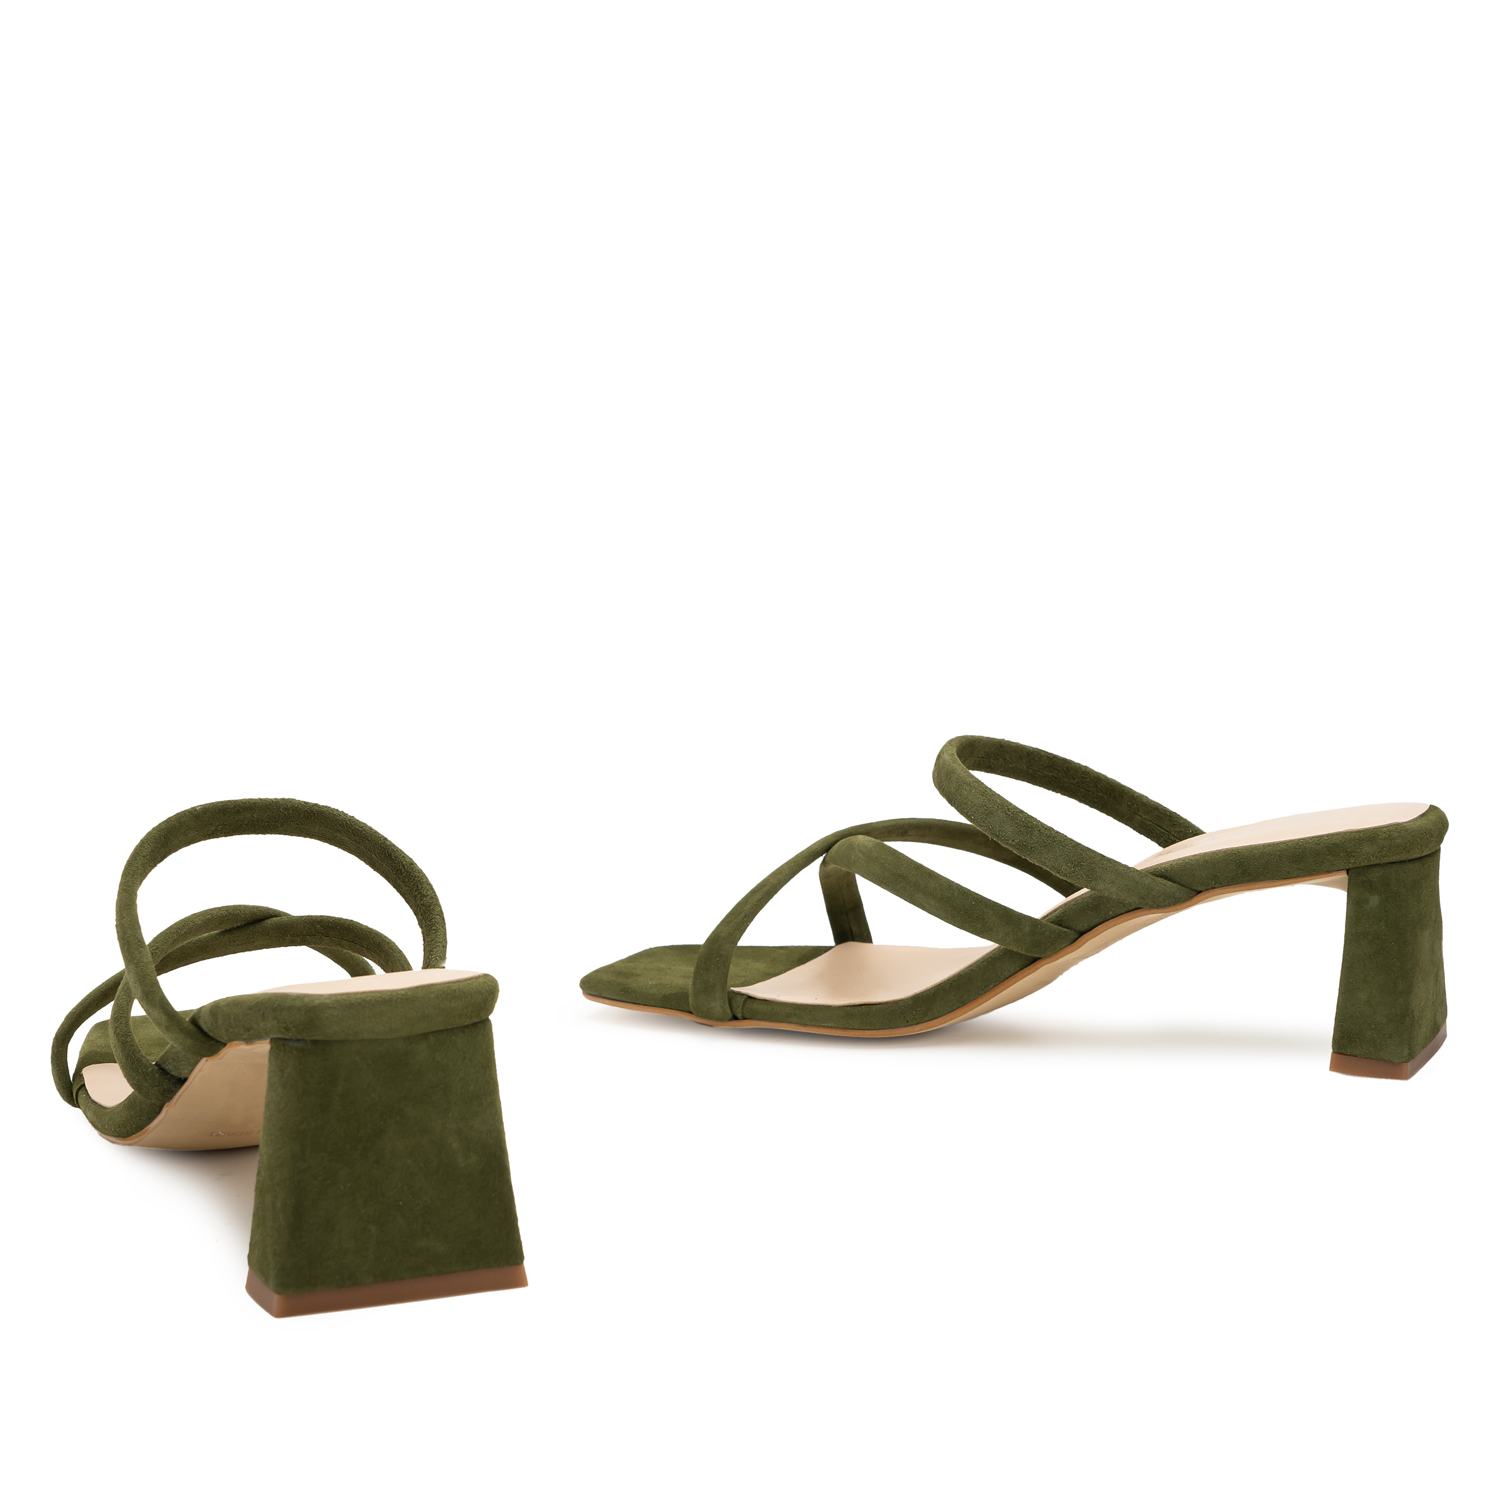 Heeled Mules in Kaki Split Leather with Square Toe 